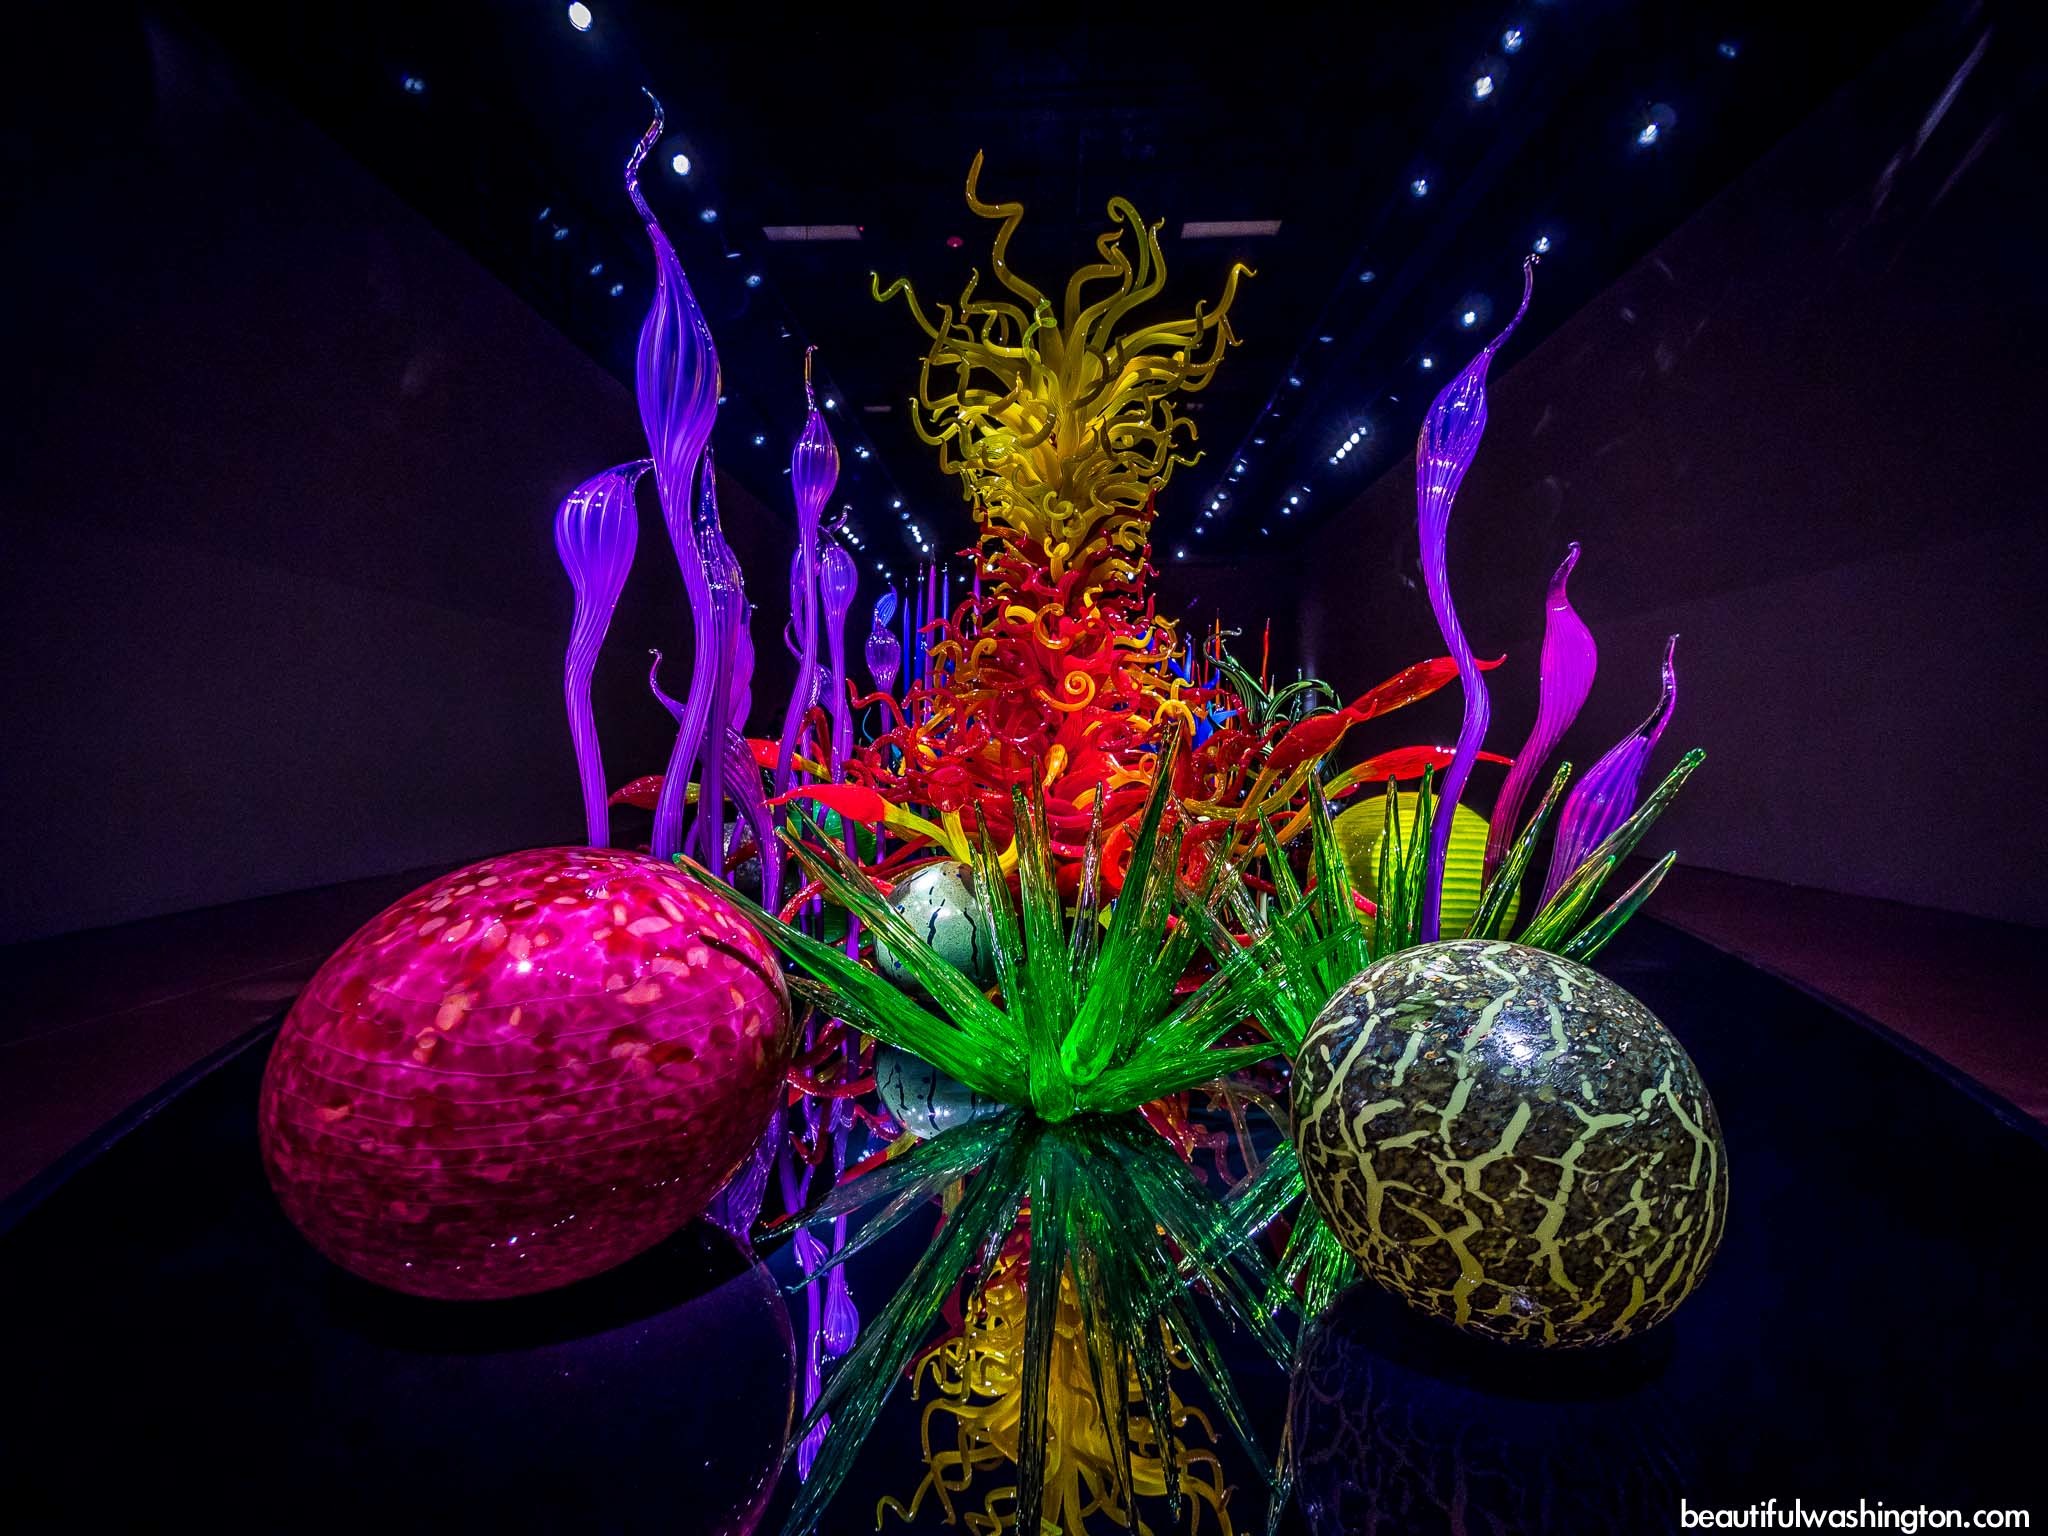 2048x1536 Chihuly Garden and Glass 120 Chihuly Garden and Glass 120 ...